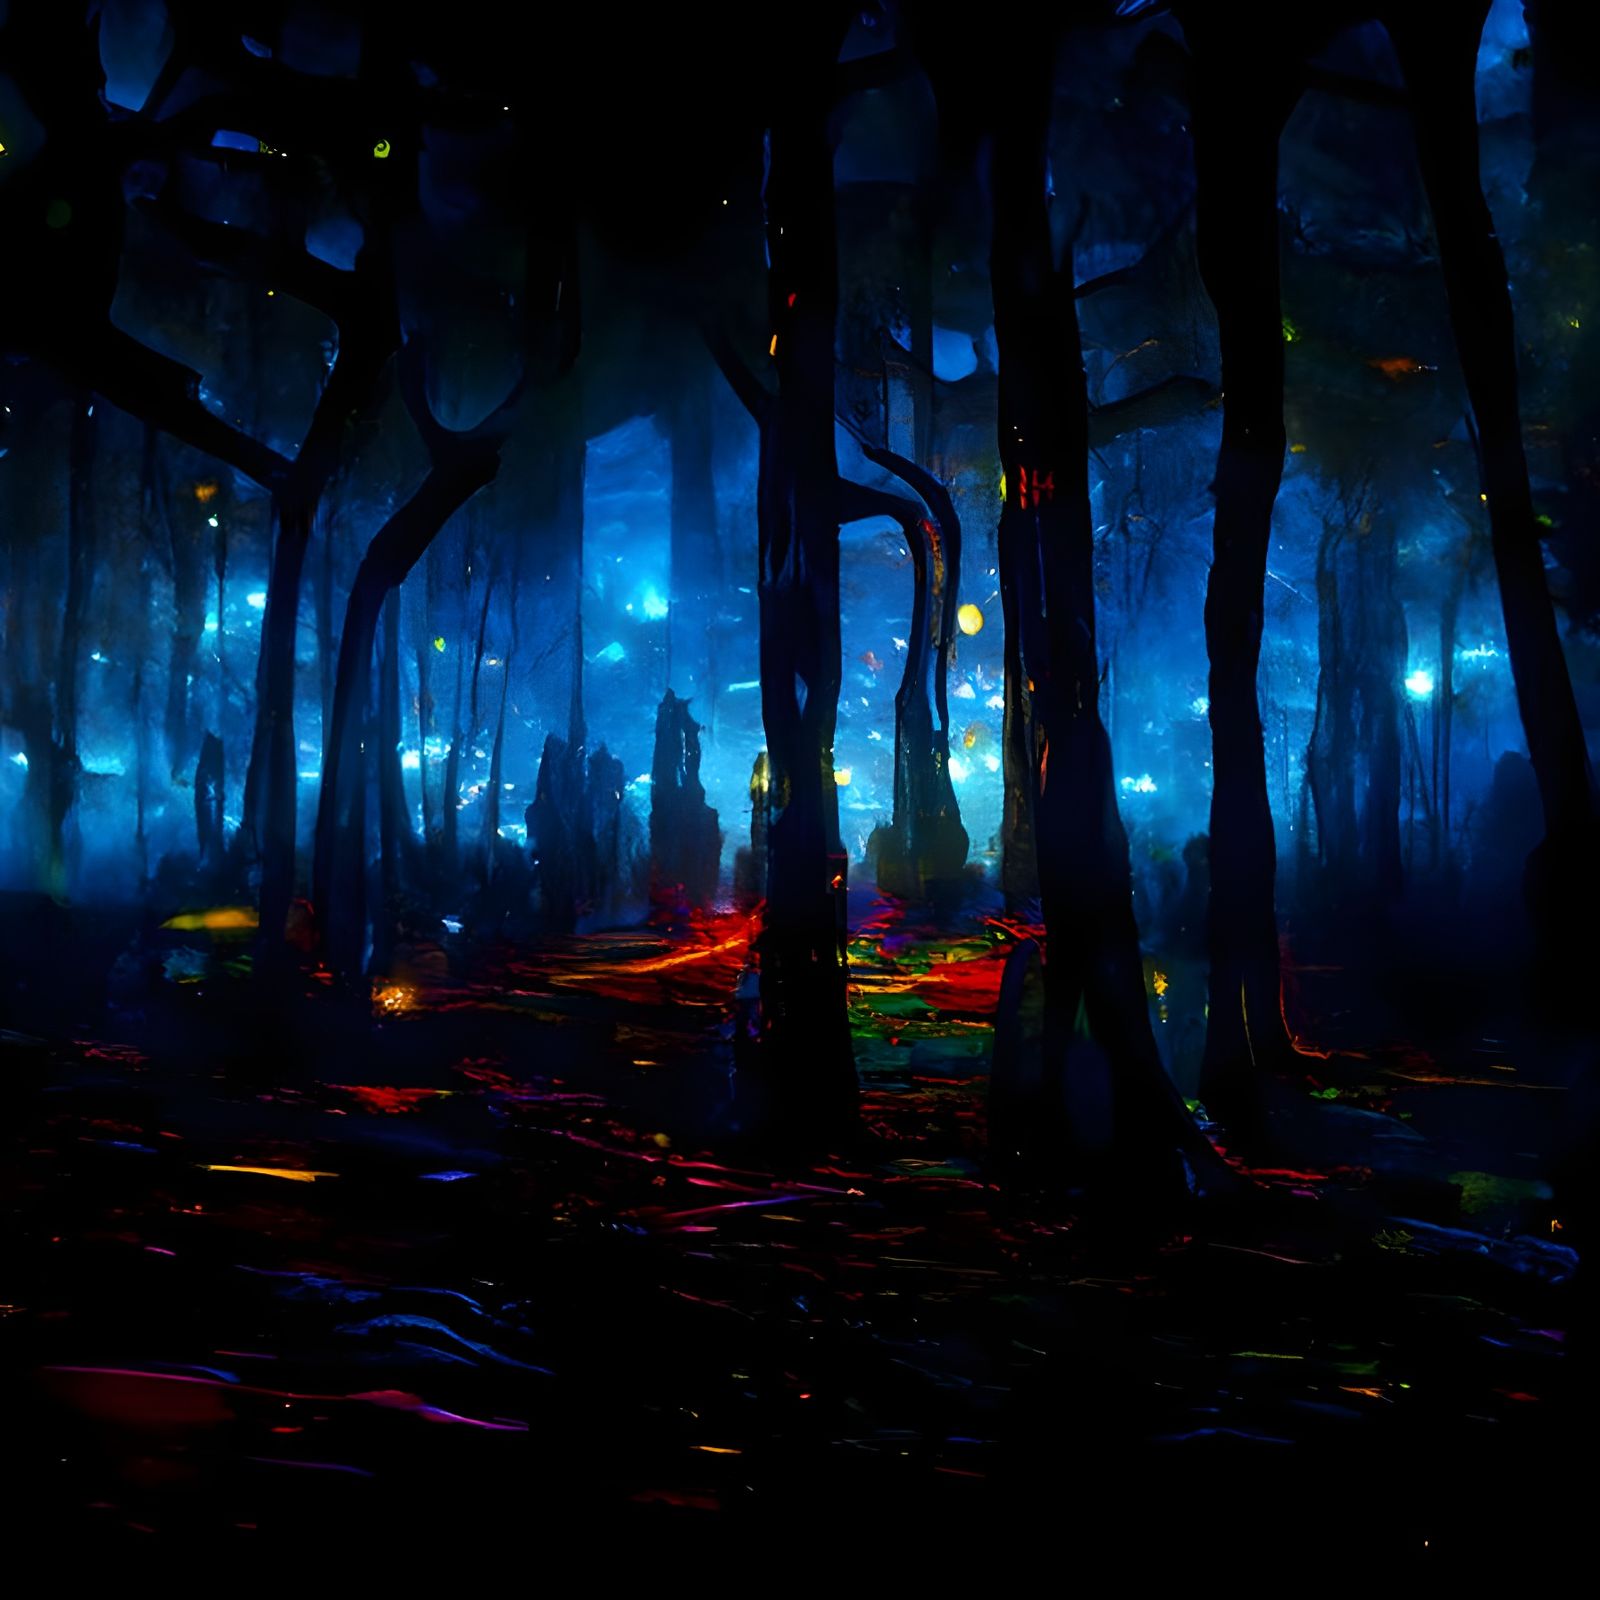 A dark forest with shafts of colorful light